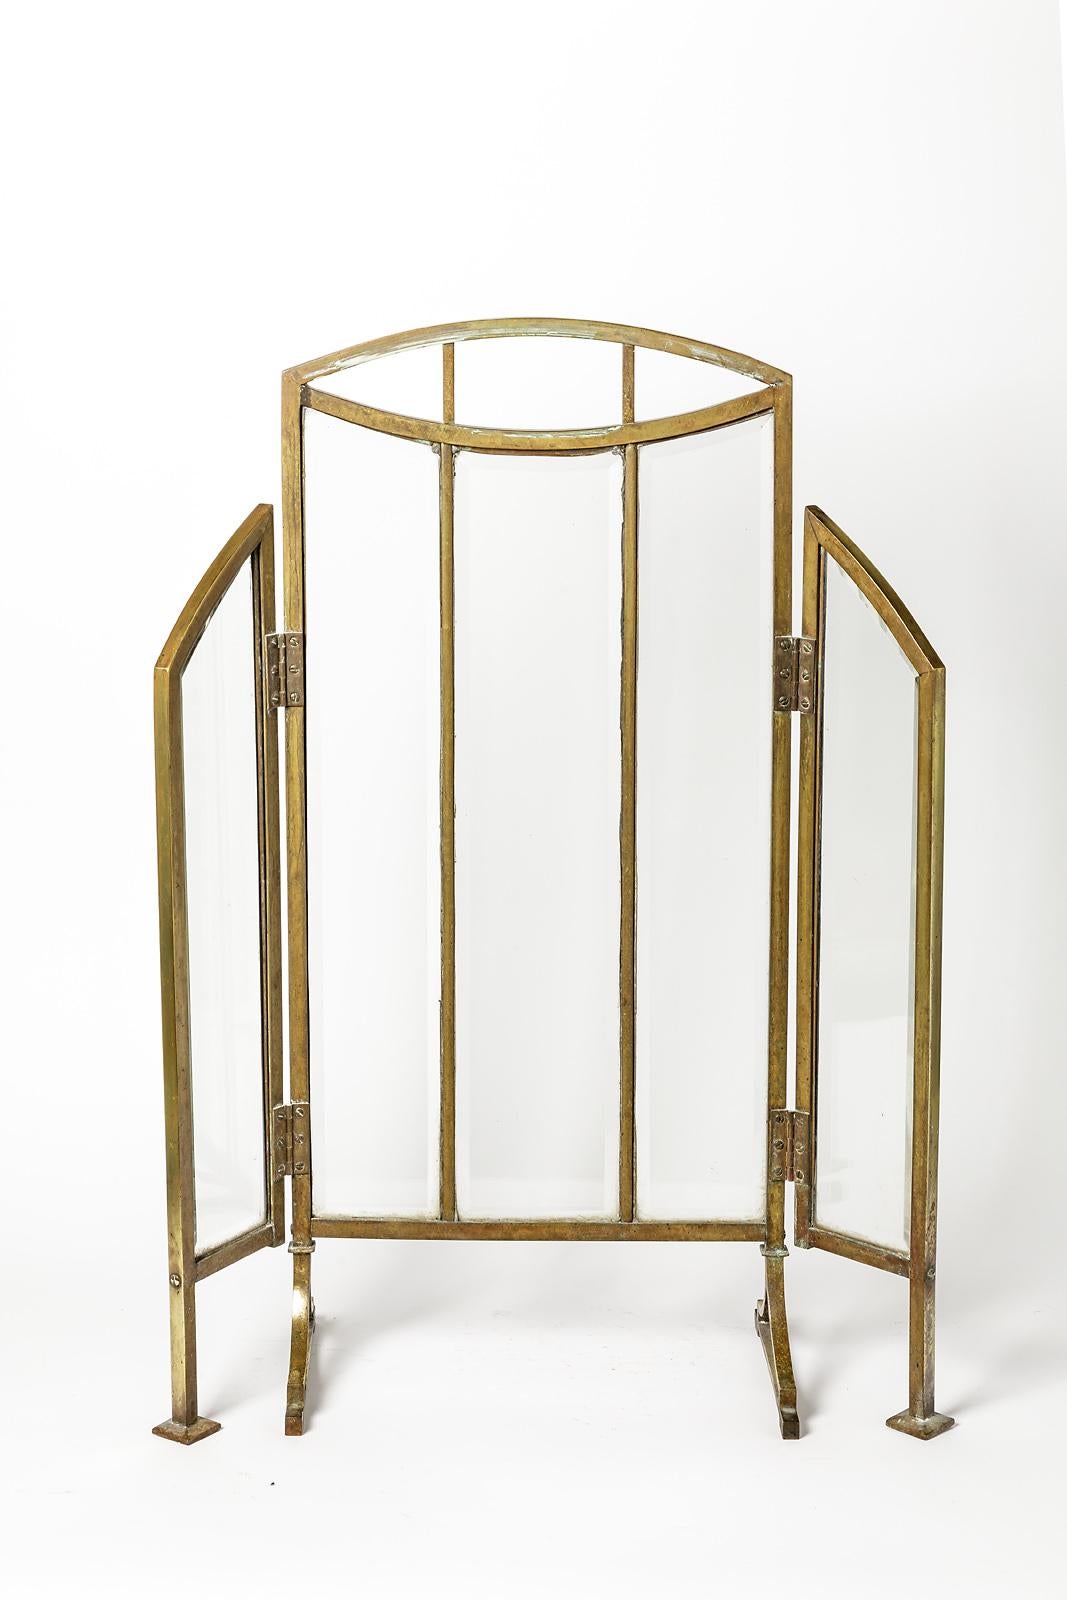 1900 French Art Deco Golden Brass and Glass Fire Screen for Fireplace 3